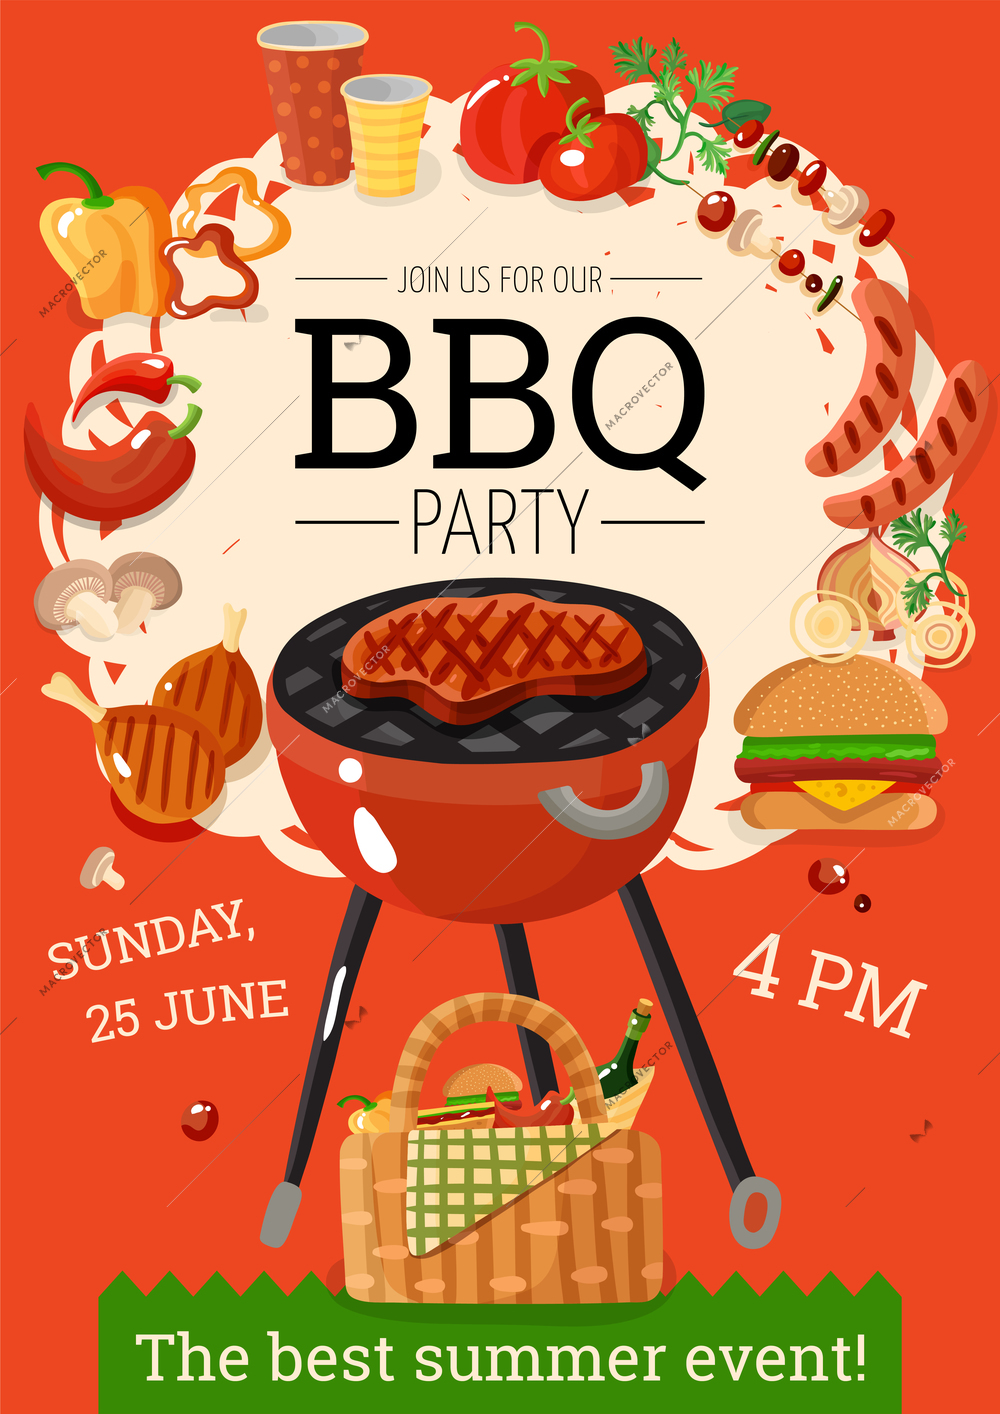 Summer bbq party announcement poster with grill basket barbecue accessories food drinks orange background flat vector illustration